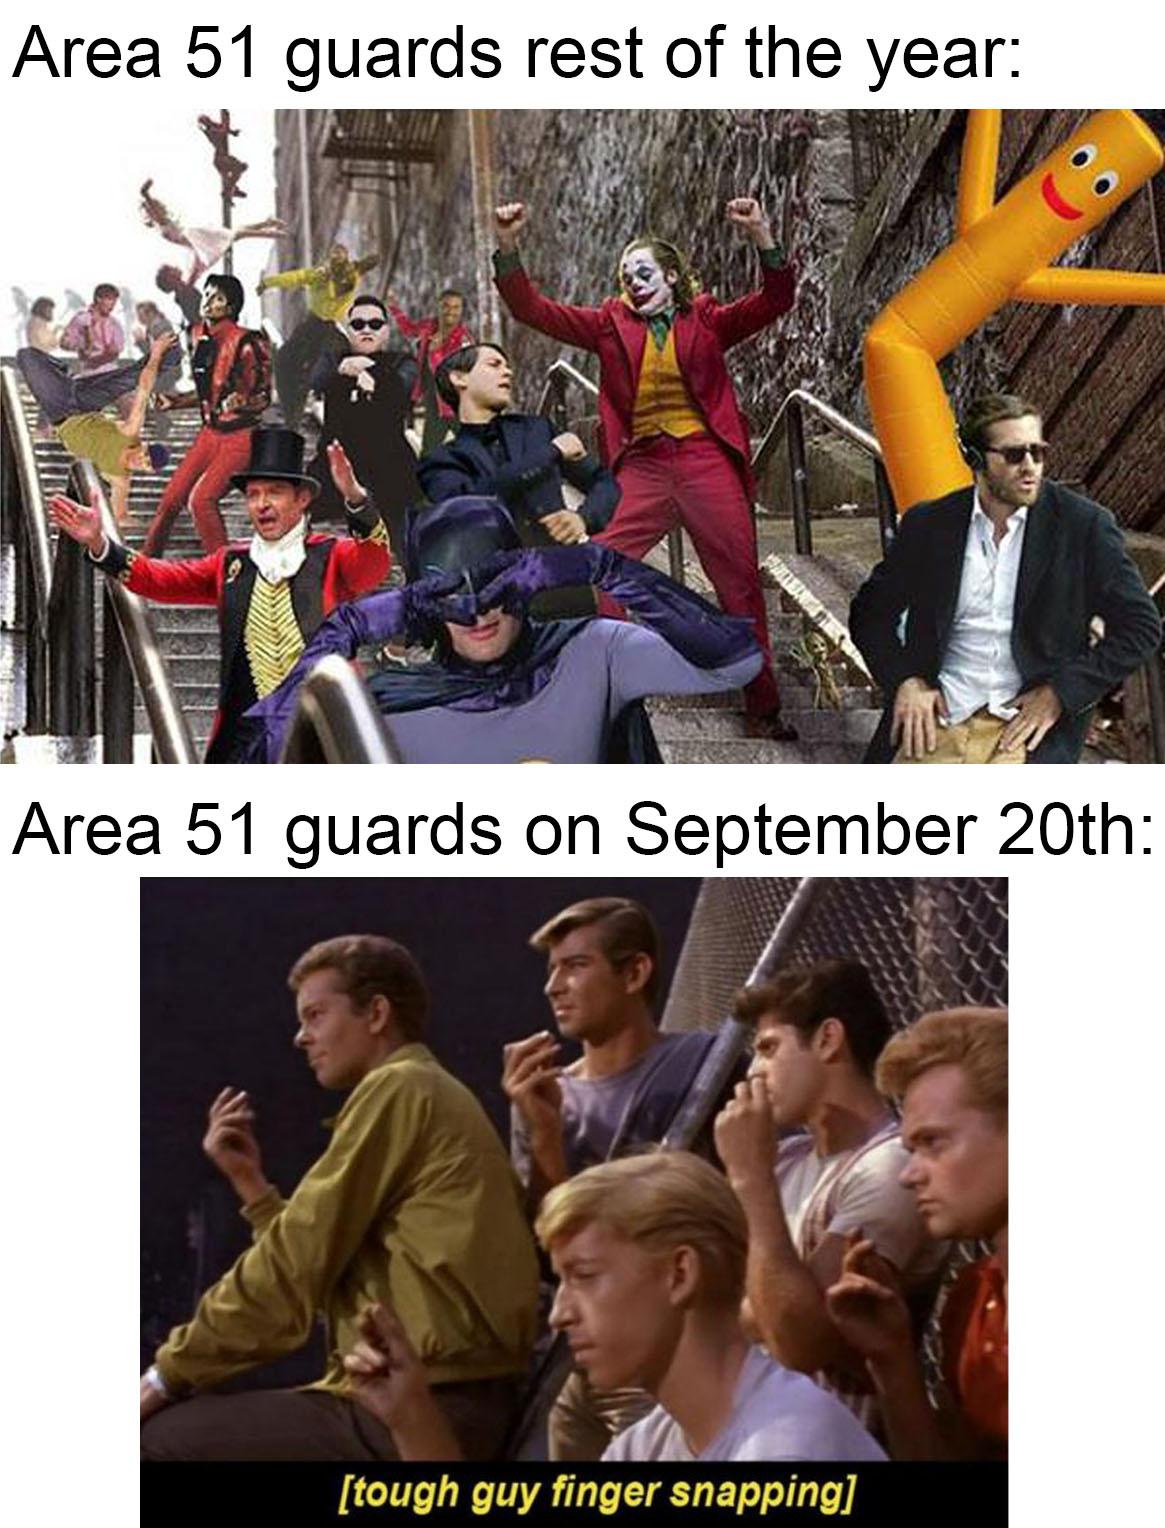 Dank Meme dank-memes cute text: Area 51 guards rest of the year: Area 51 guards on September 20th: [tough guy finger snapping] 